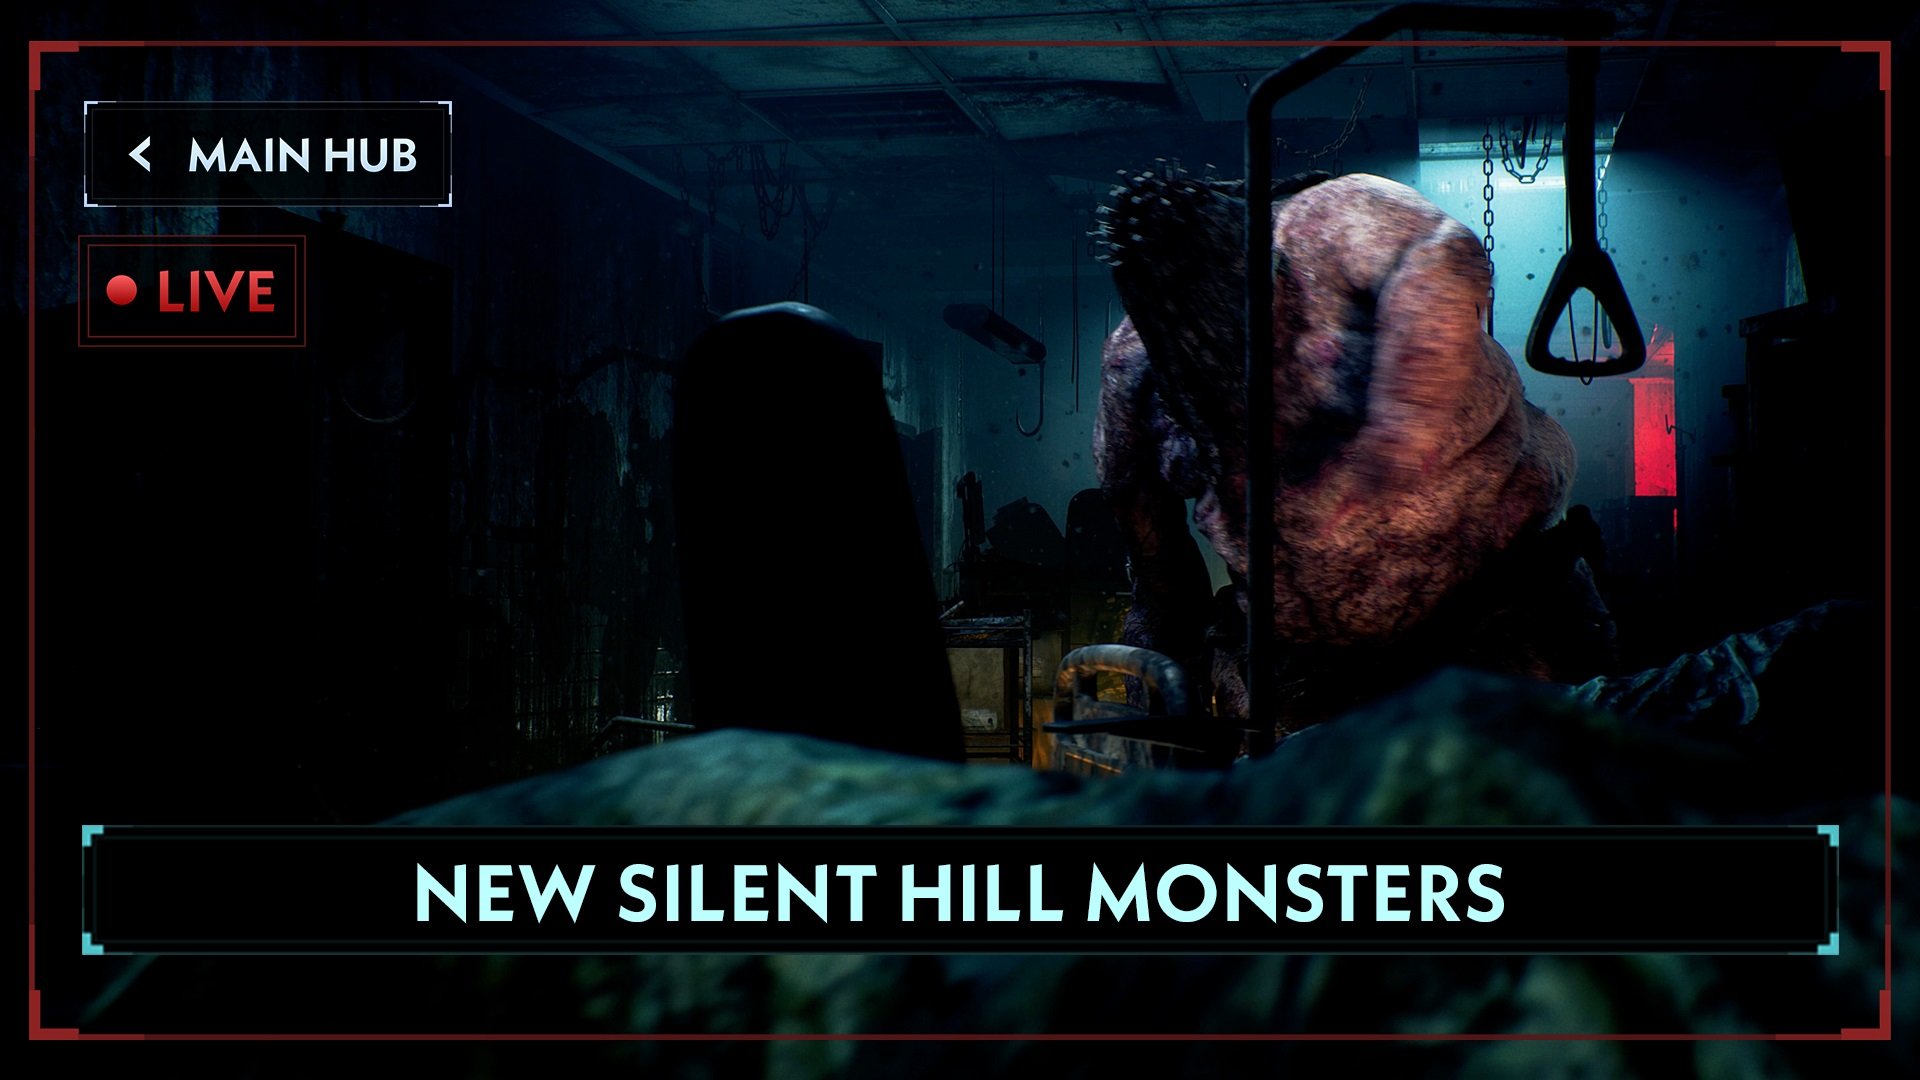 Silent Hill 2 Remake Release Date Has Been Revealed?